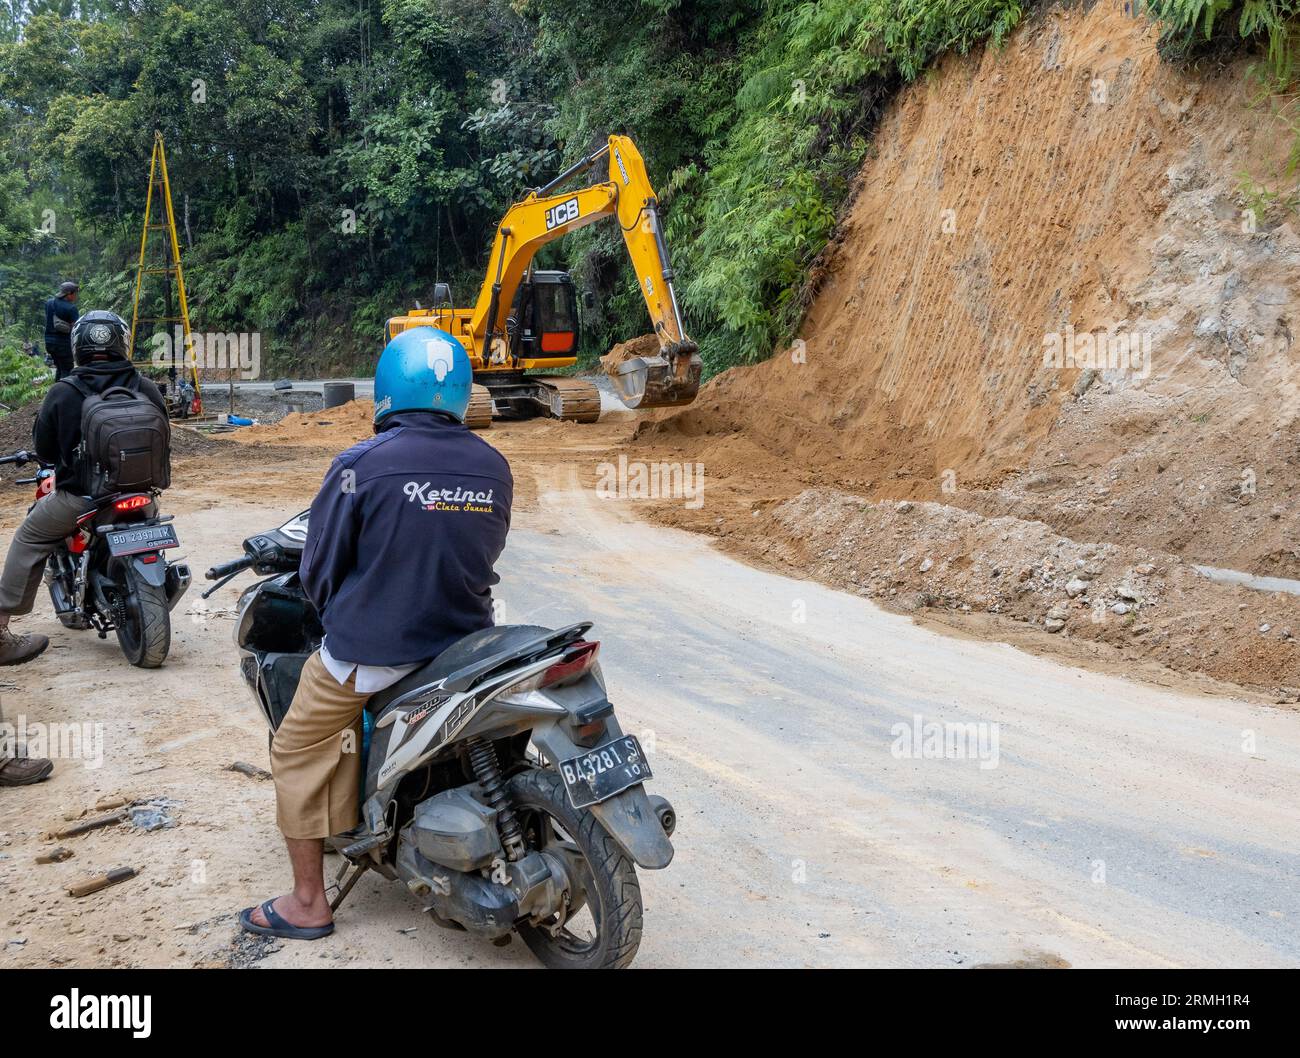 Men on motorbike waiting road crew cleaning up a mountain road with an excavator. Sumatra, Indonesia. Stock Photo